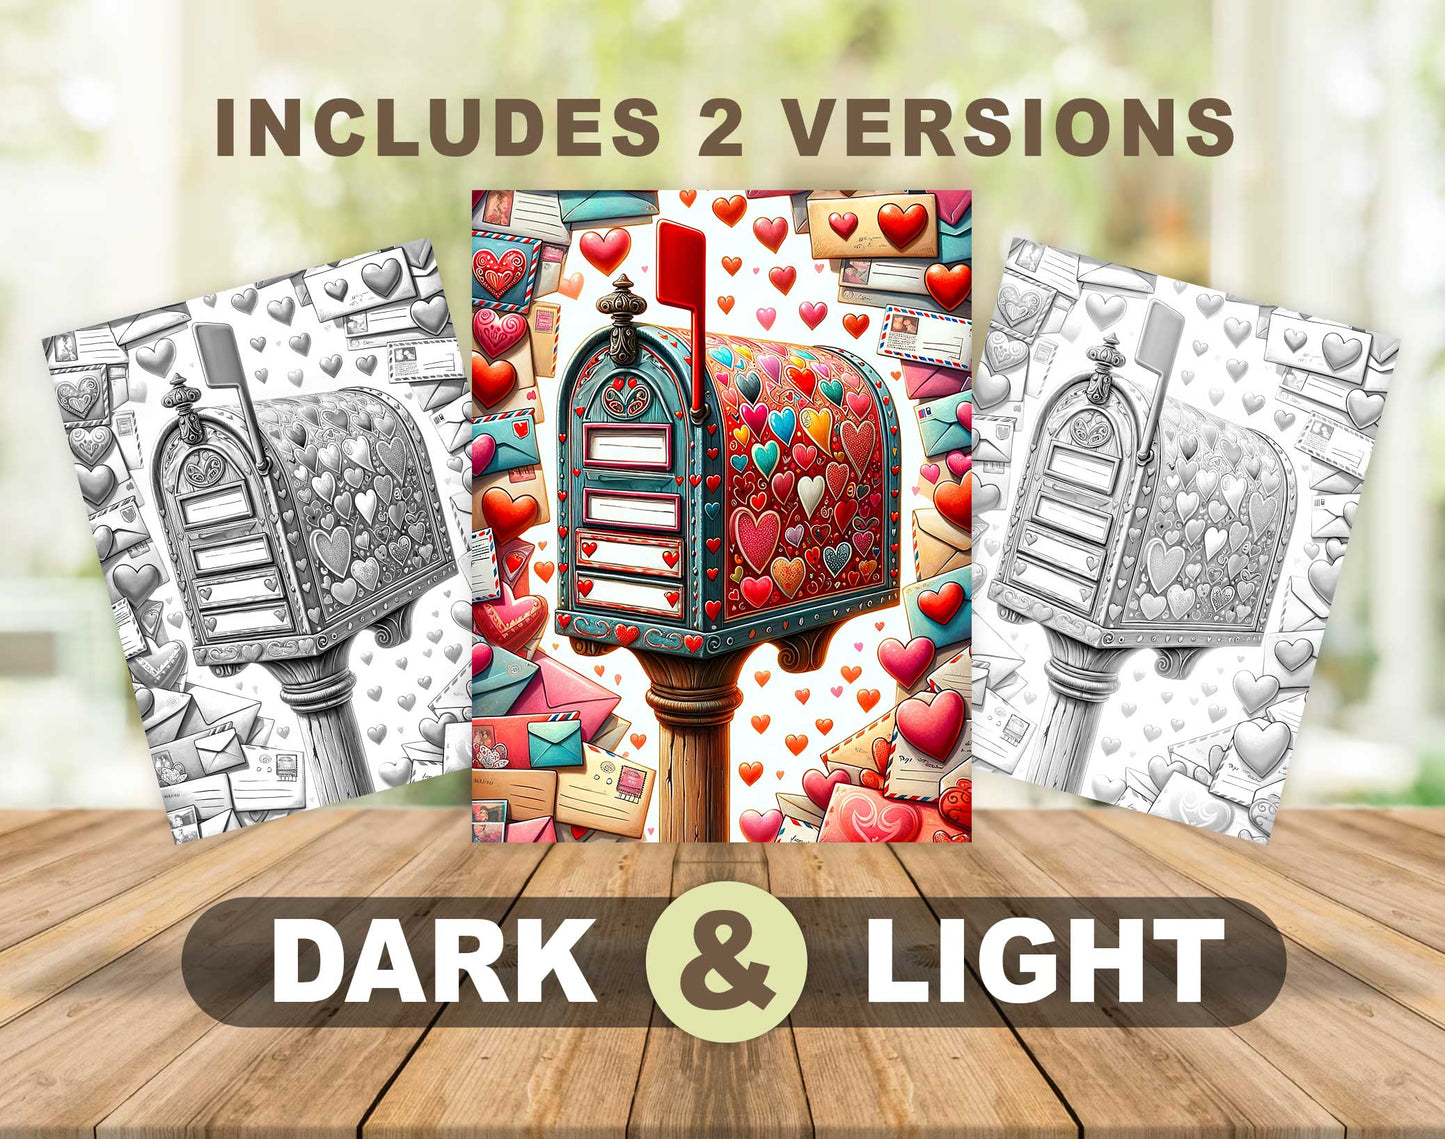 50 Valentine Vintage Object Grayscale Coloring Pages - Instant Download - Printable Dark/Light